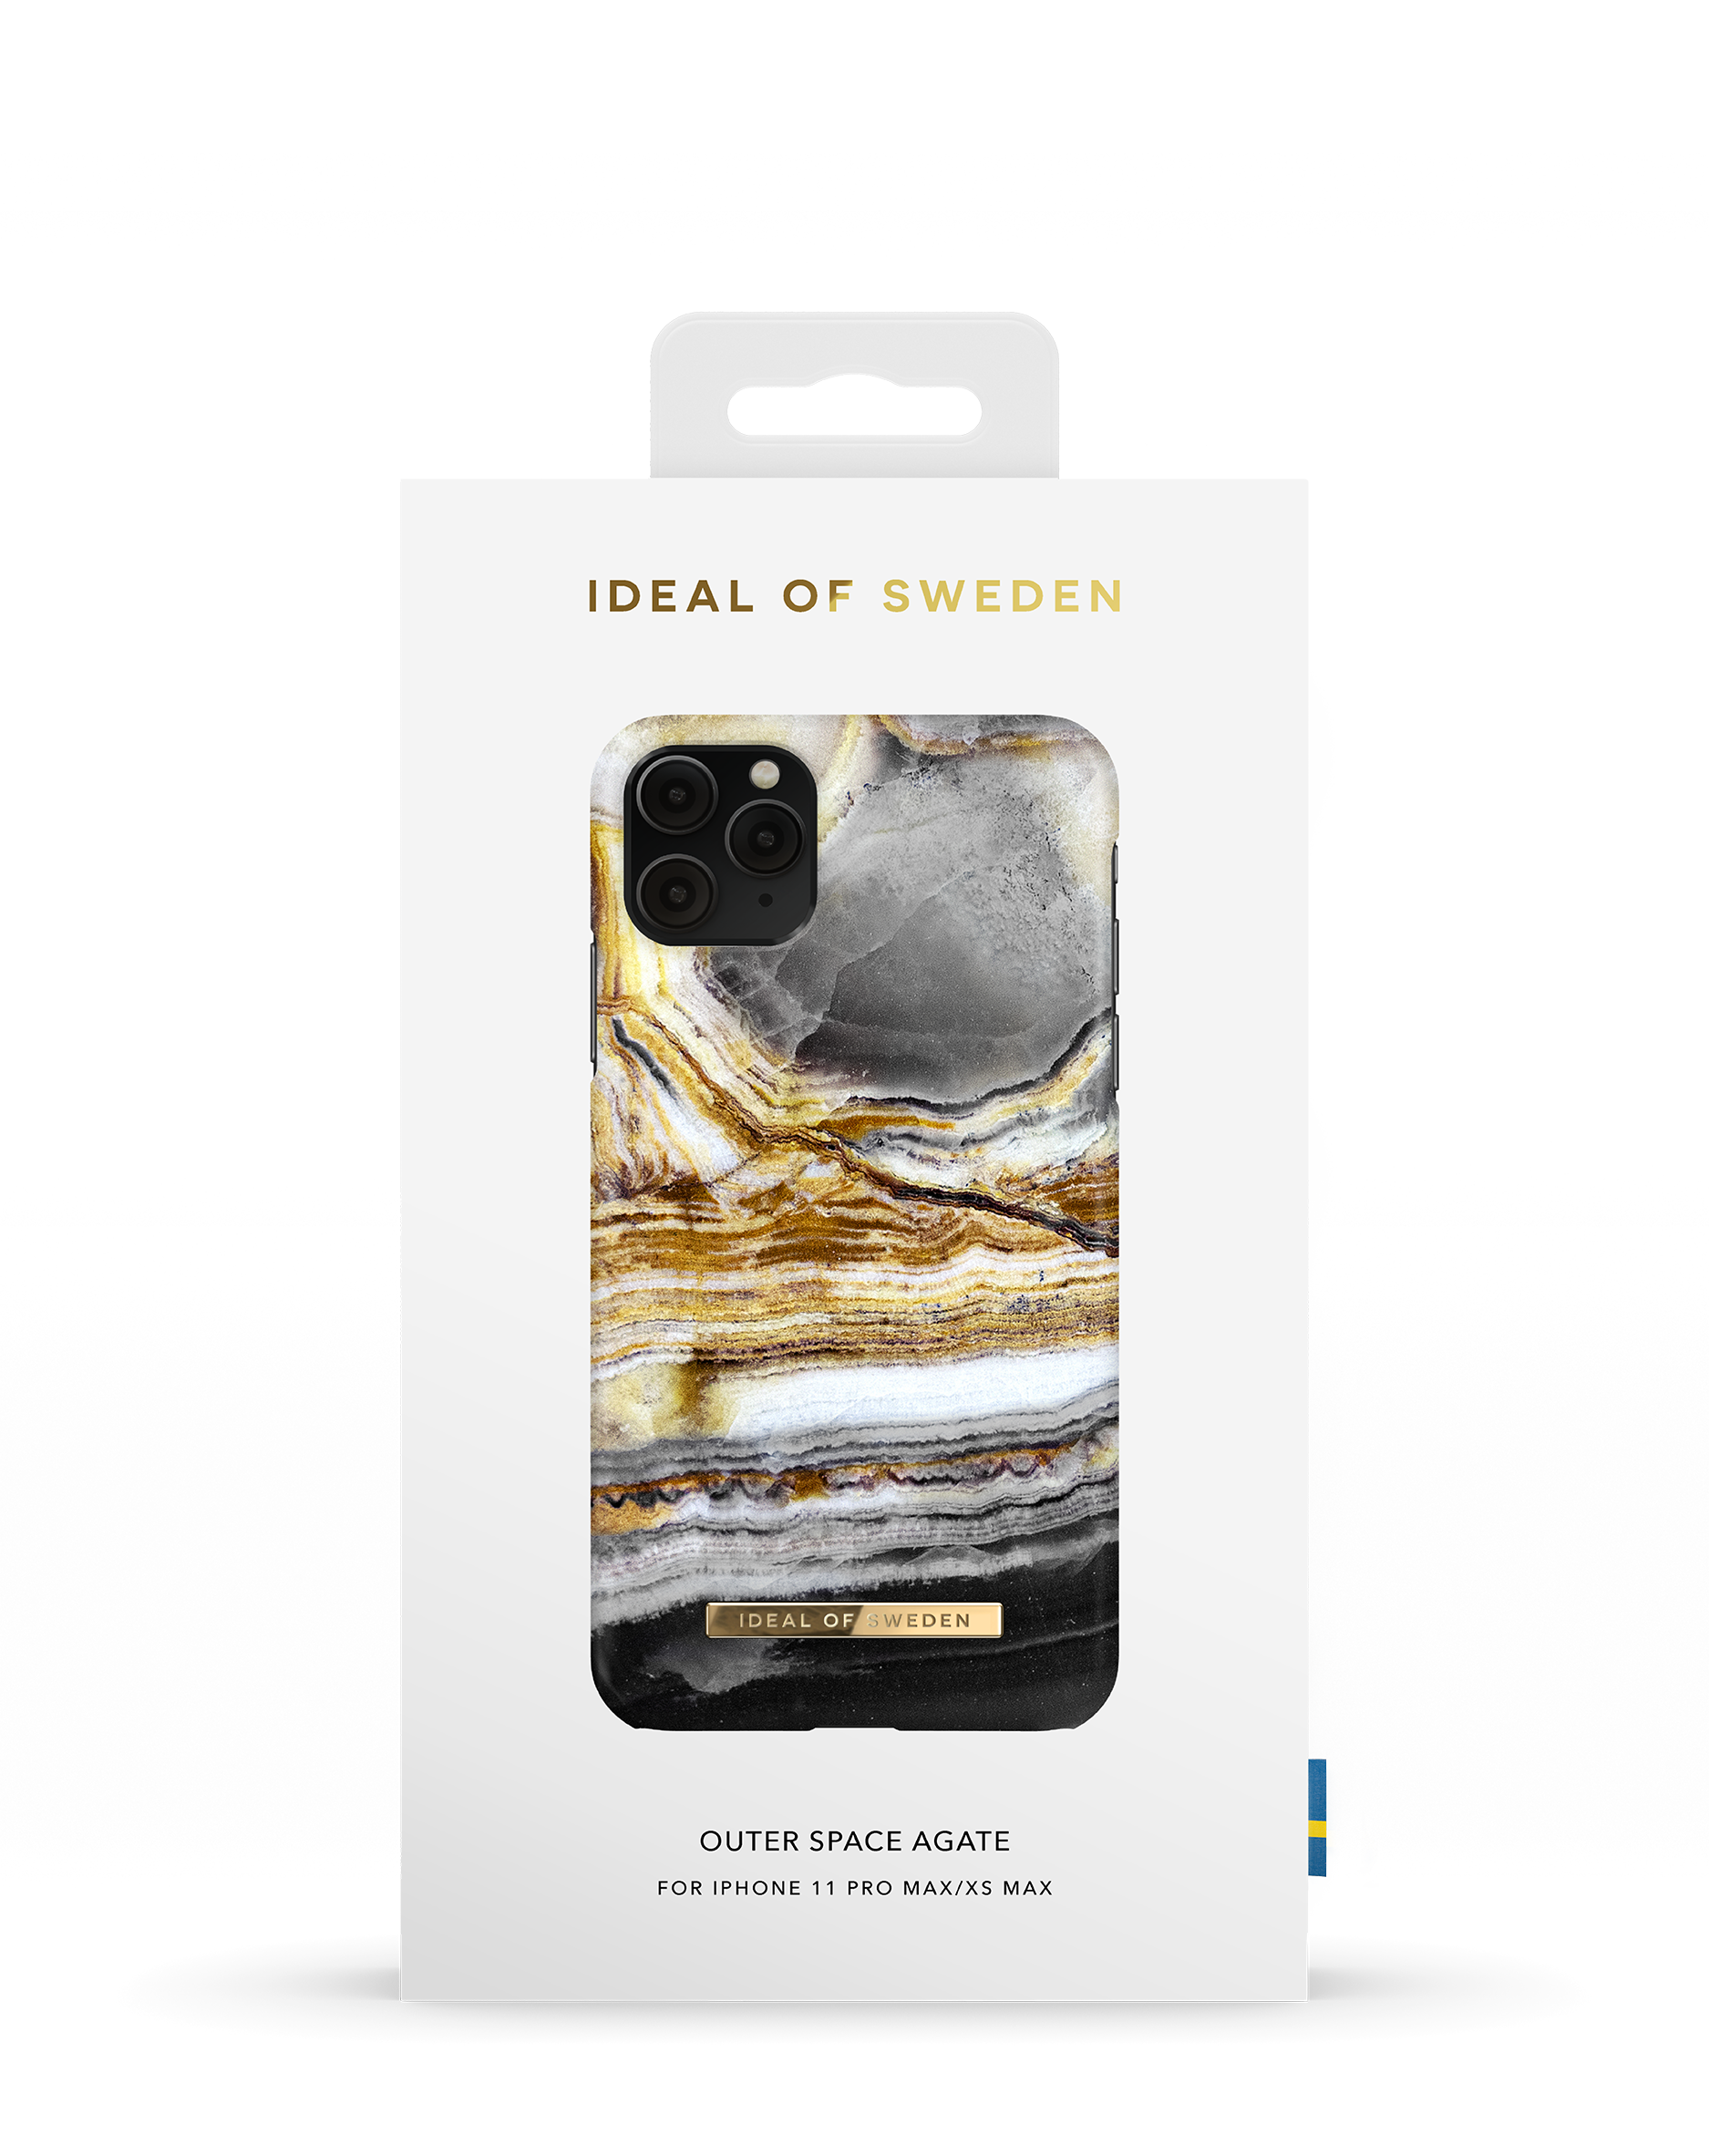 Outer Backcover, Apple Space OF 11 iPhone Pro iPhone Marble XS Apple, Max, IDEAL IDFCAW18-I1965-99, SWEDEN Apple Max,